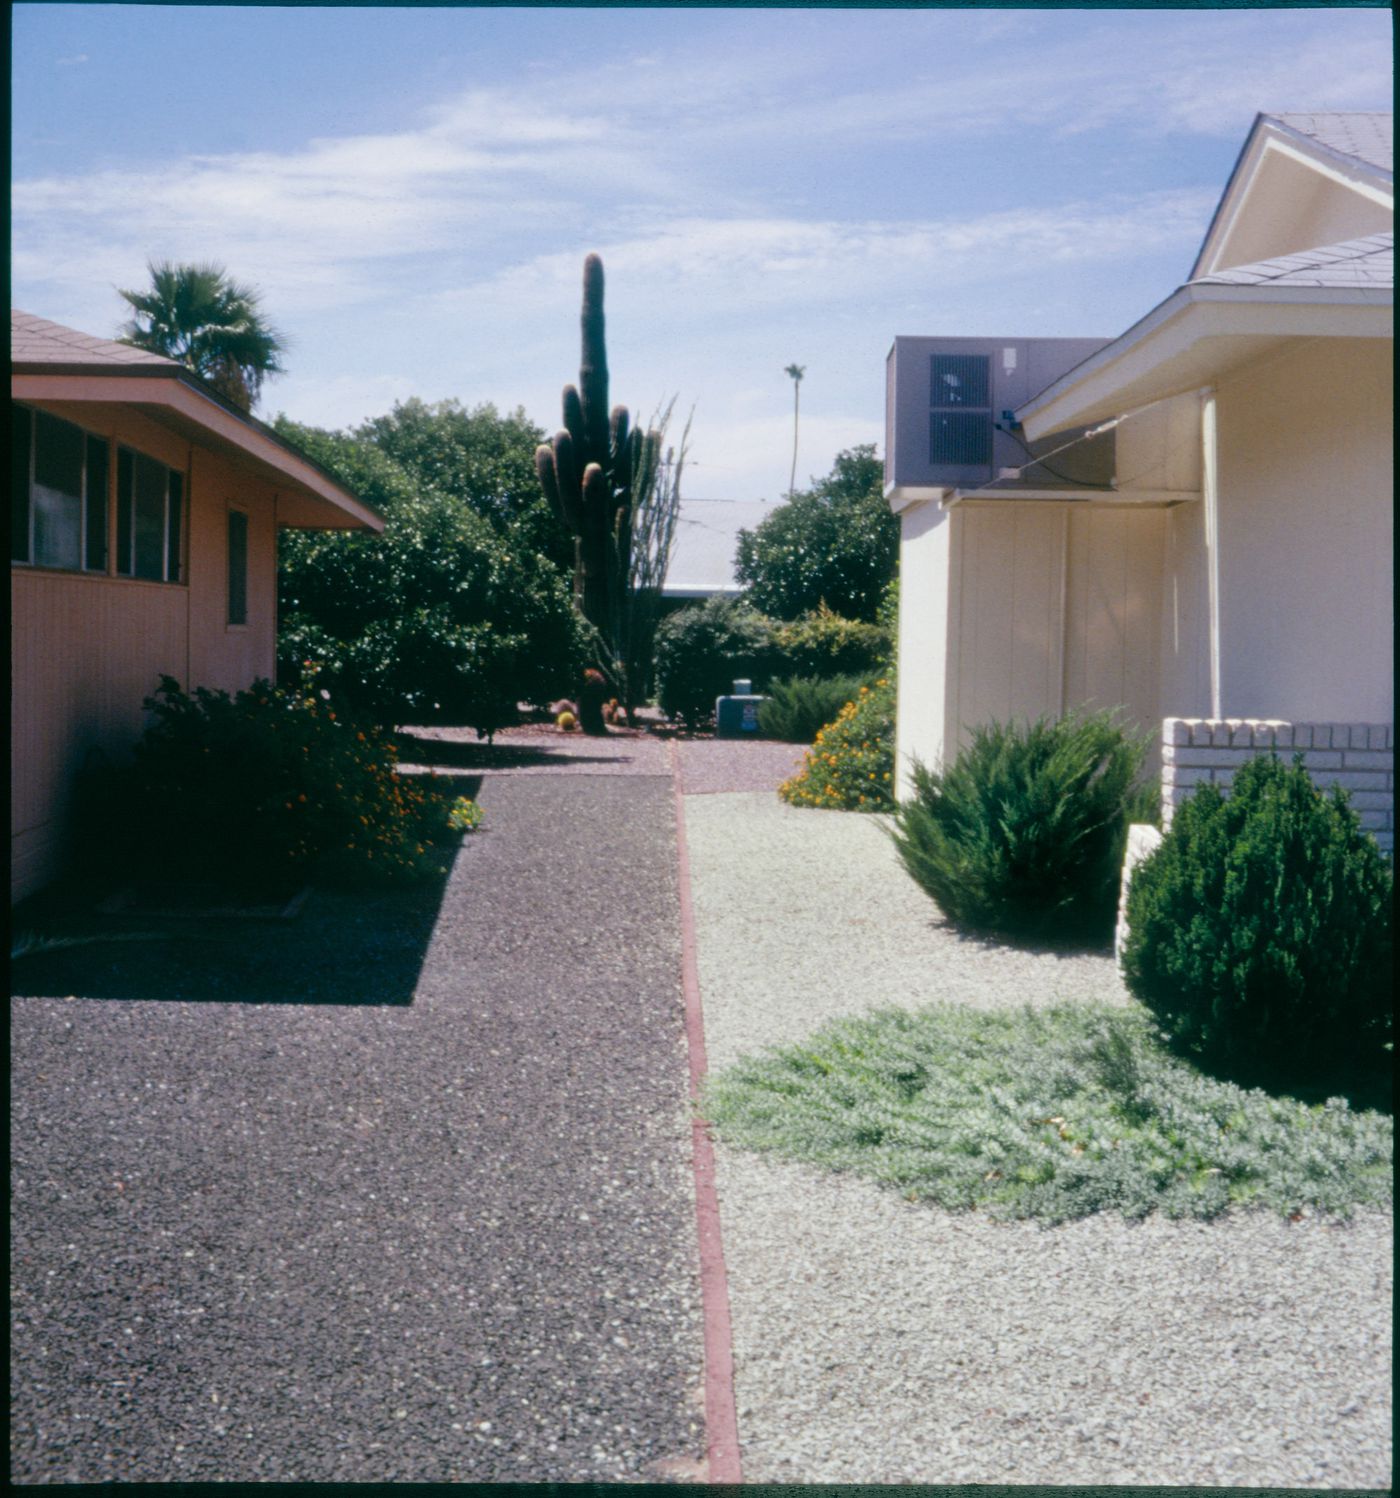 From the series "Neighbors", view of 102-104 North Mission Street, Sun City, Arizona, United States